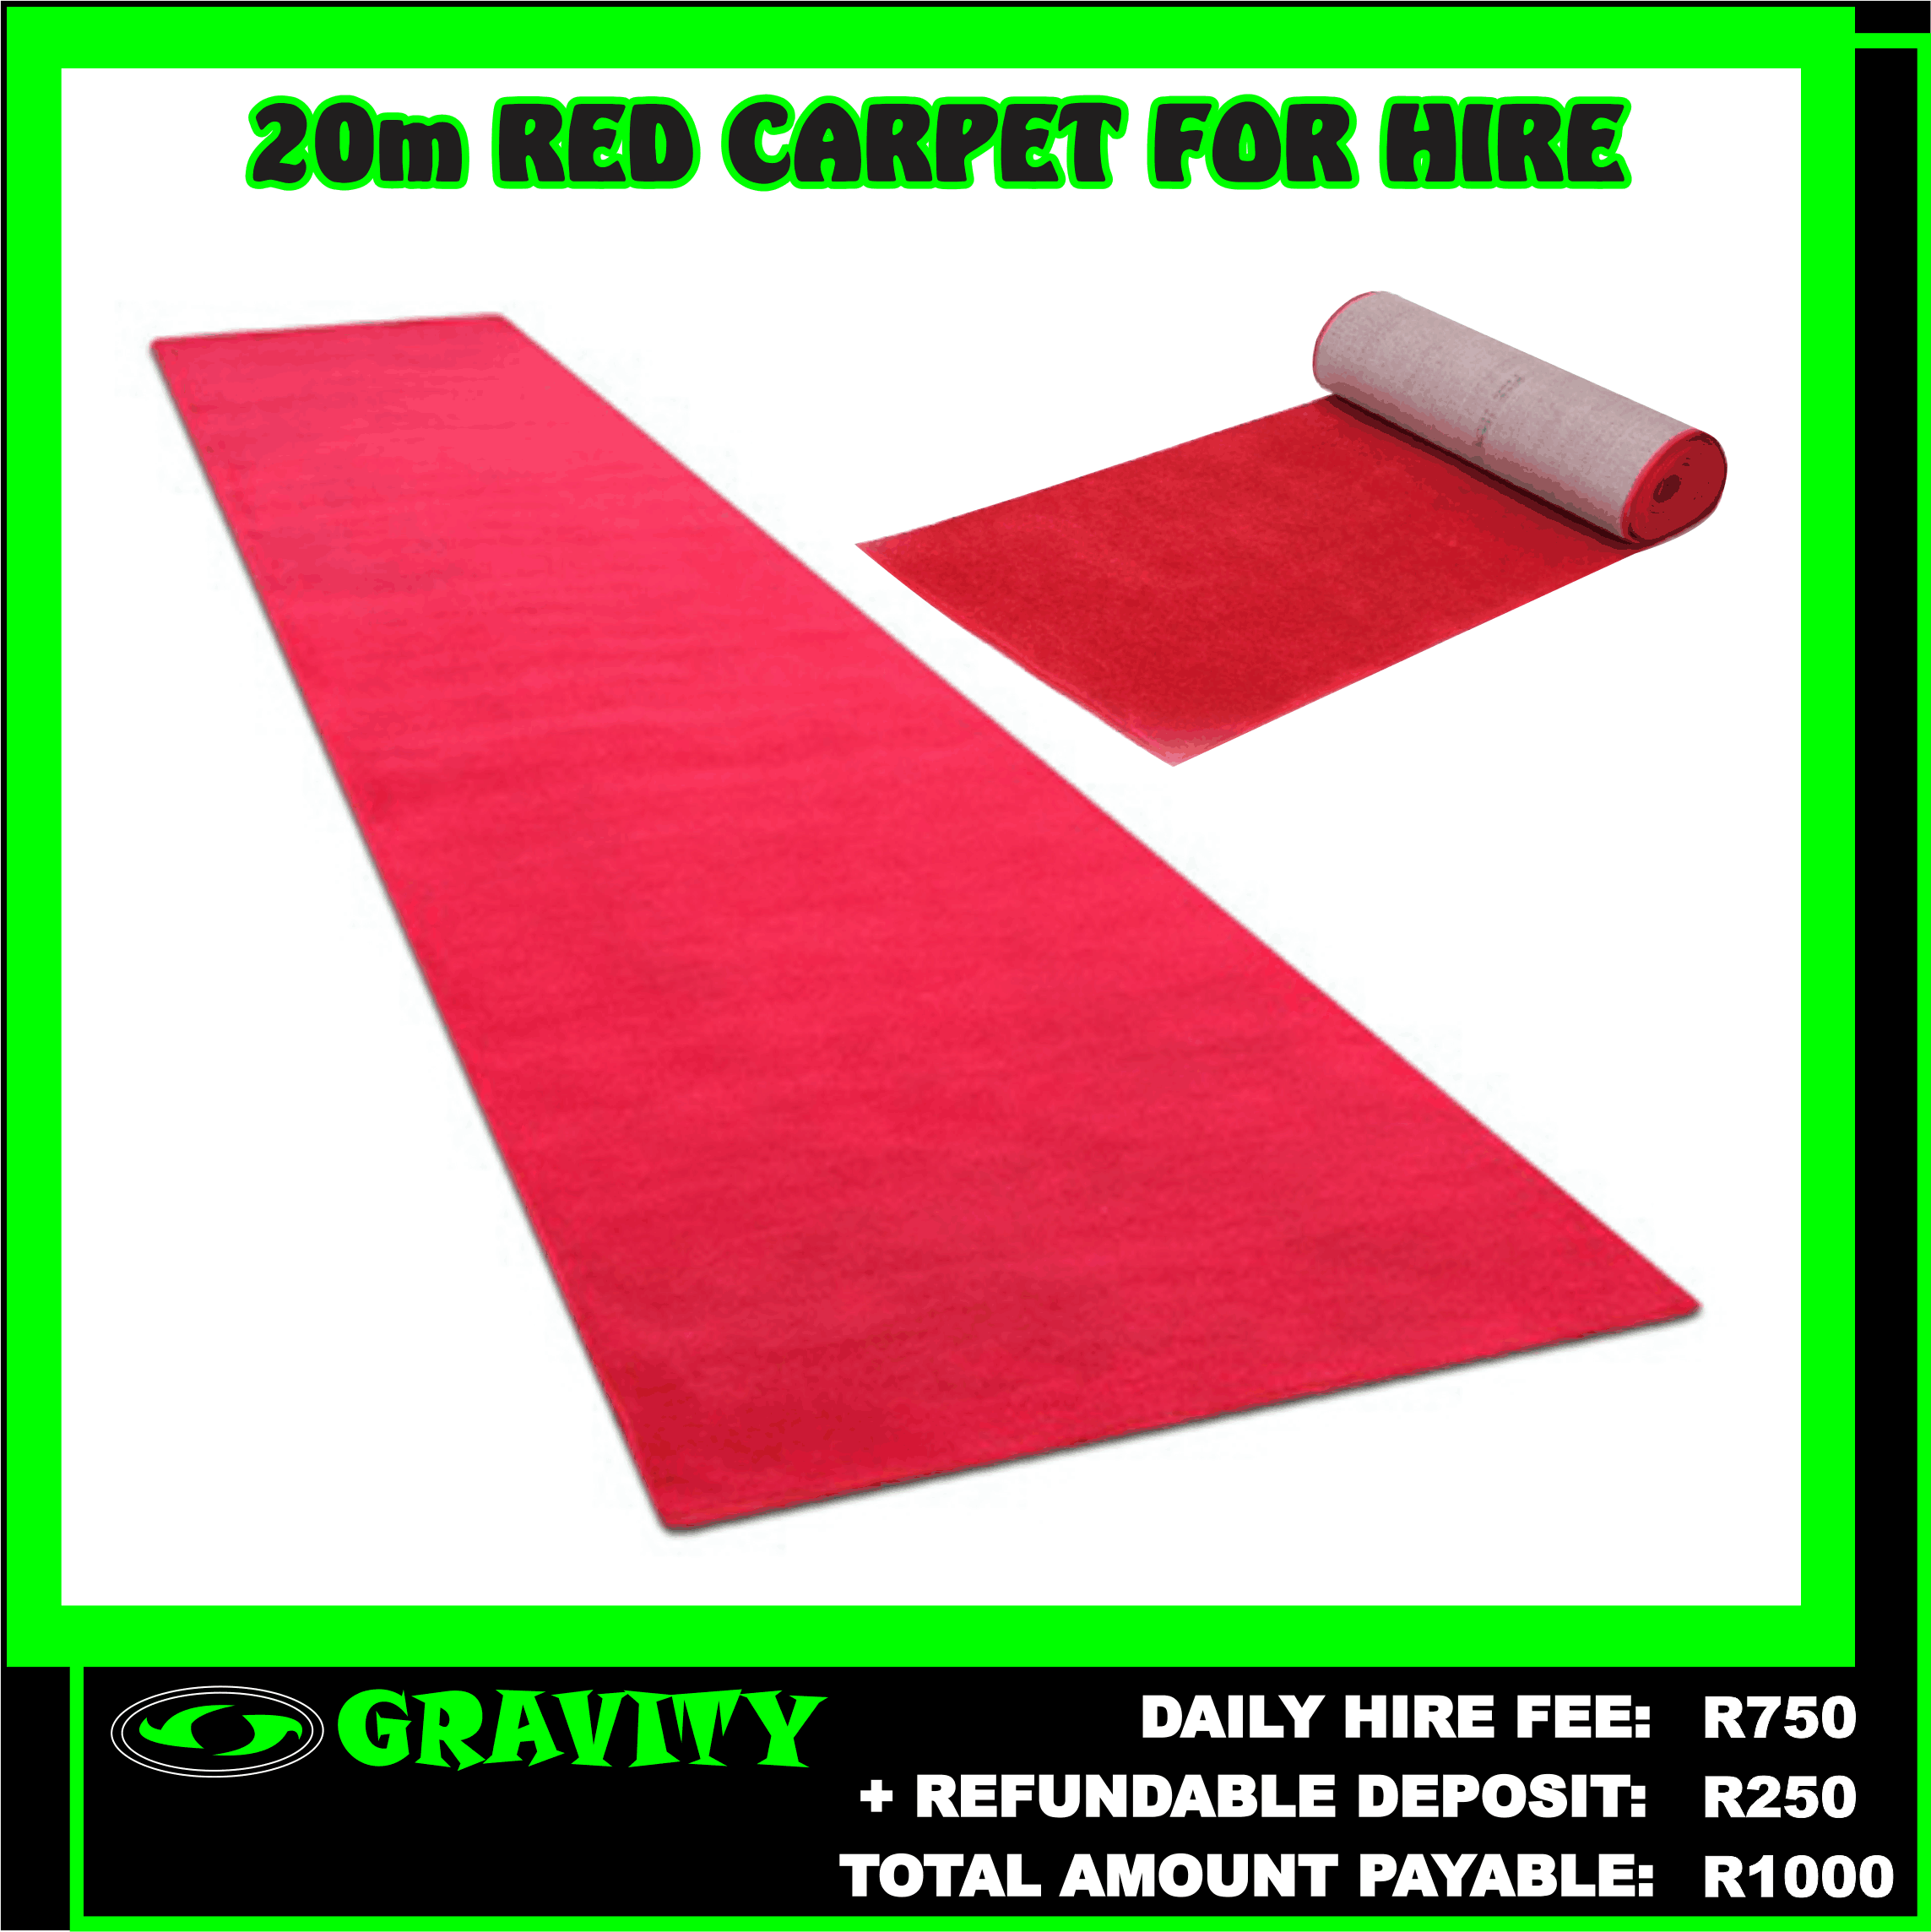 20M RED CARPET FOR HIRE DURBAN 